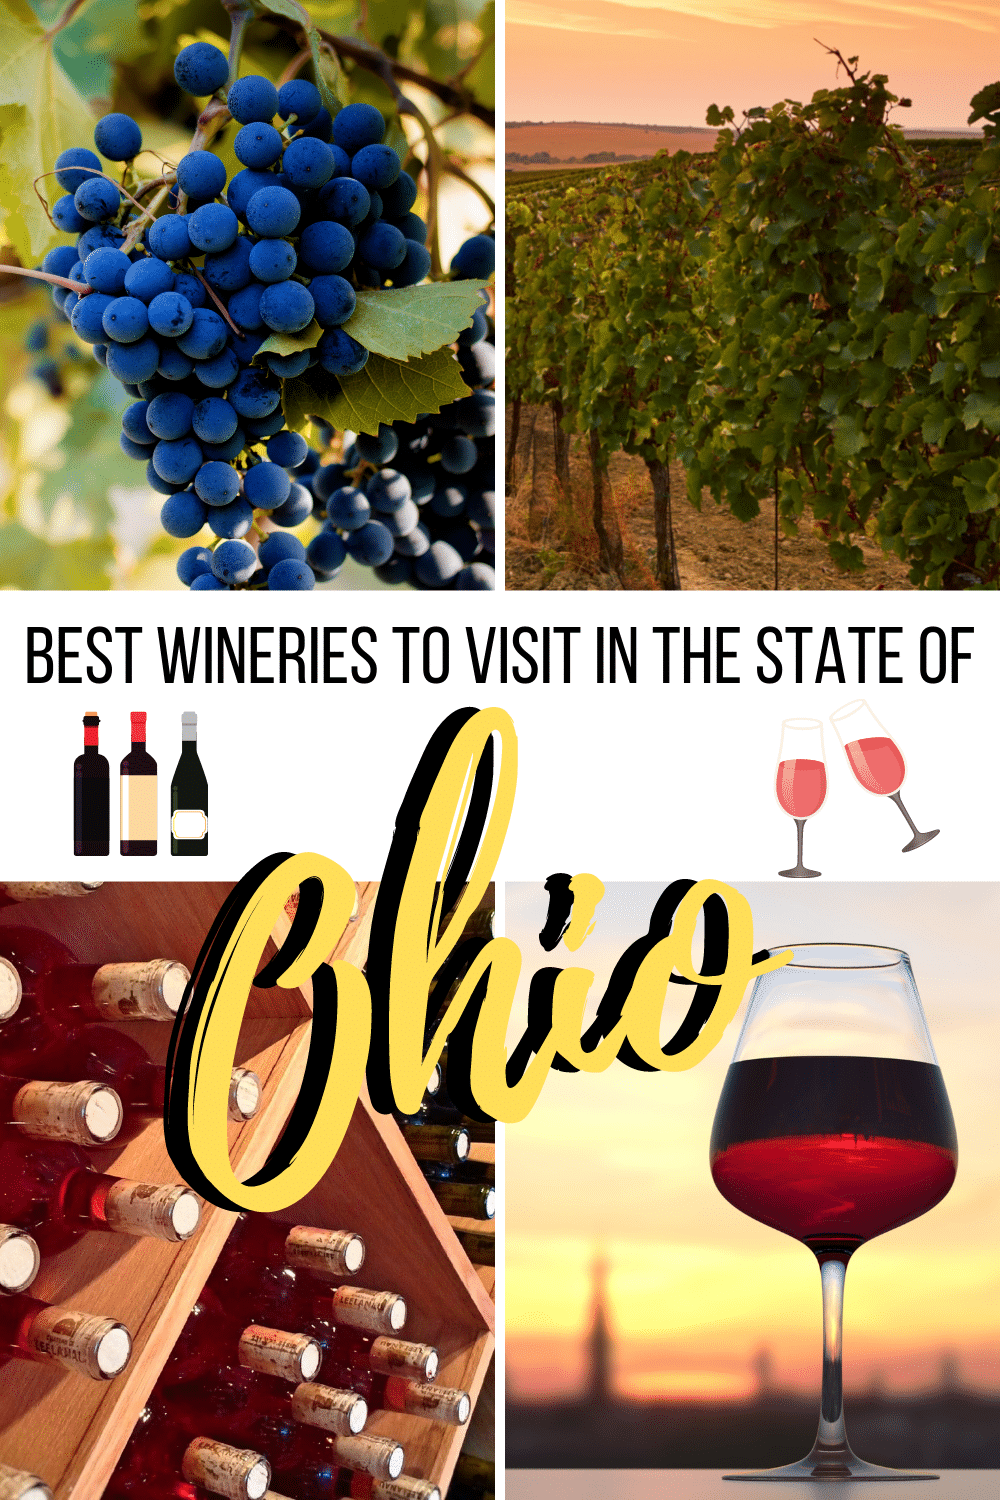 There are over 20+ wineries in Geneva Ohio. Plan a weekend of fun, food and great wine at the wineries in Geneva Ohio! #ohiowine #ohiowineries #genevaohio